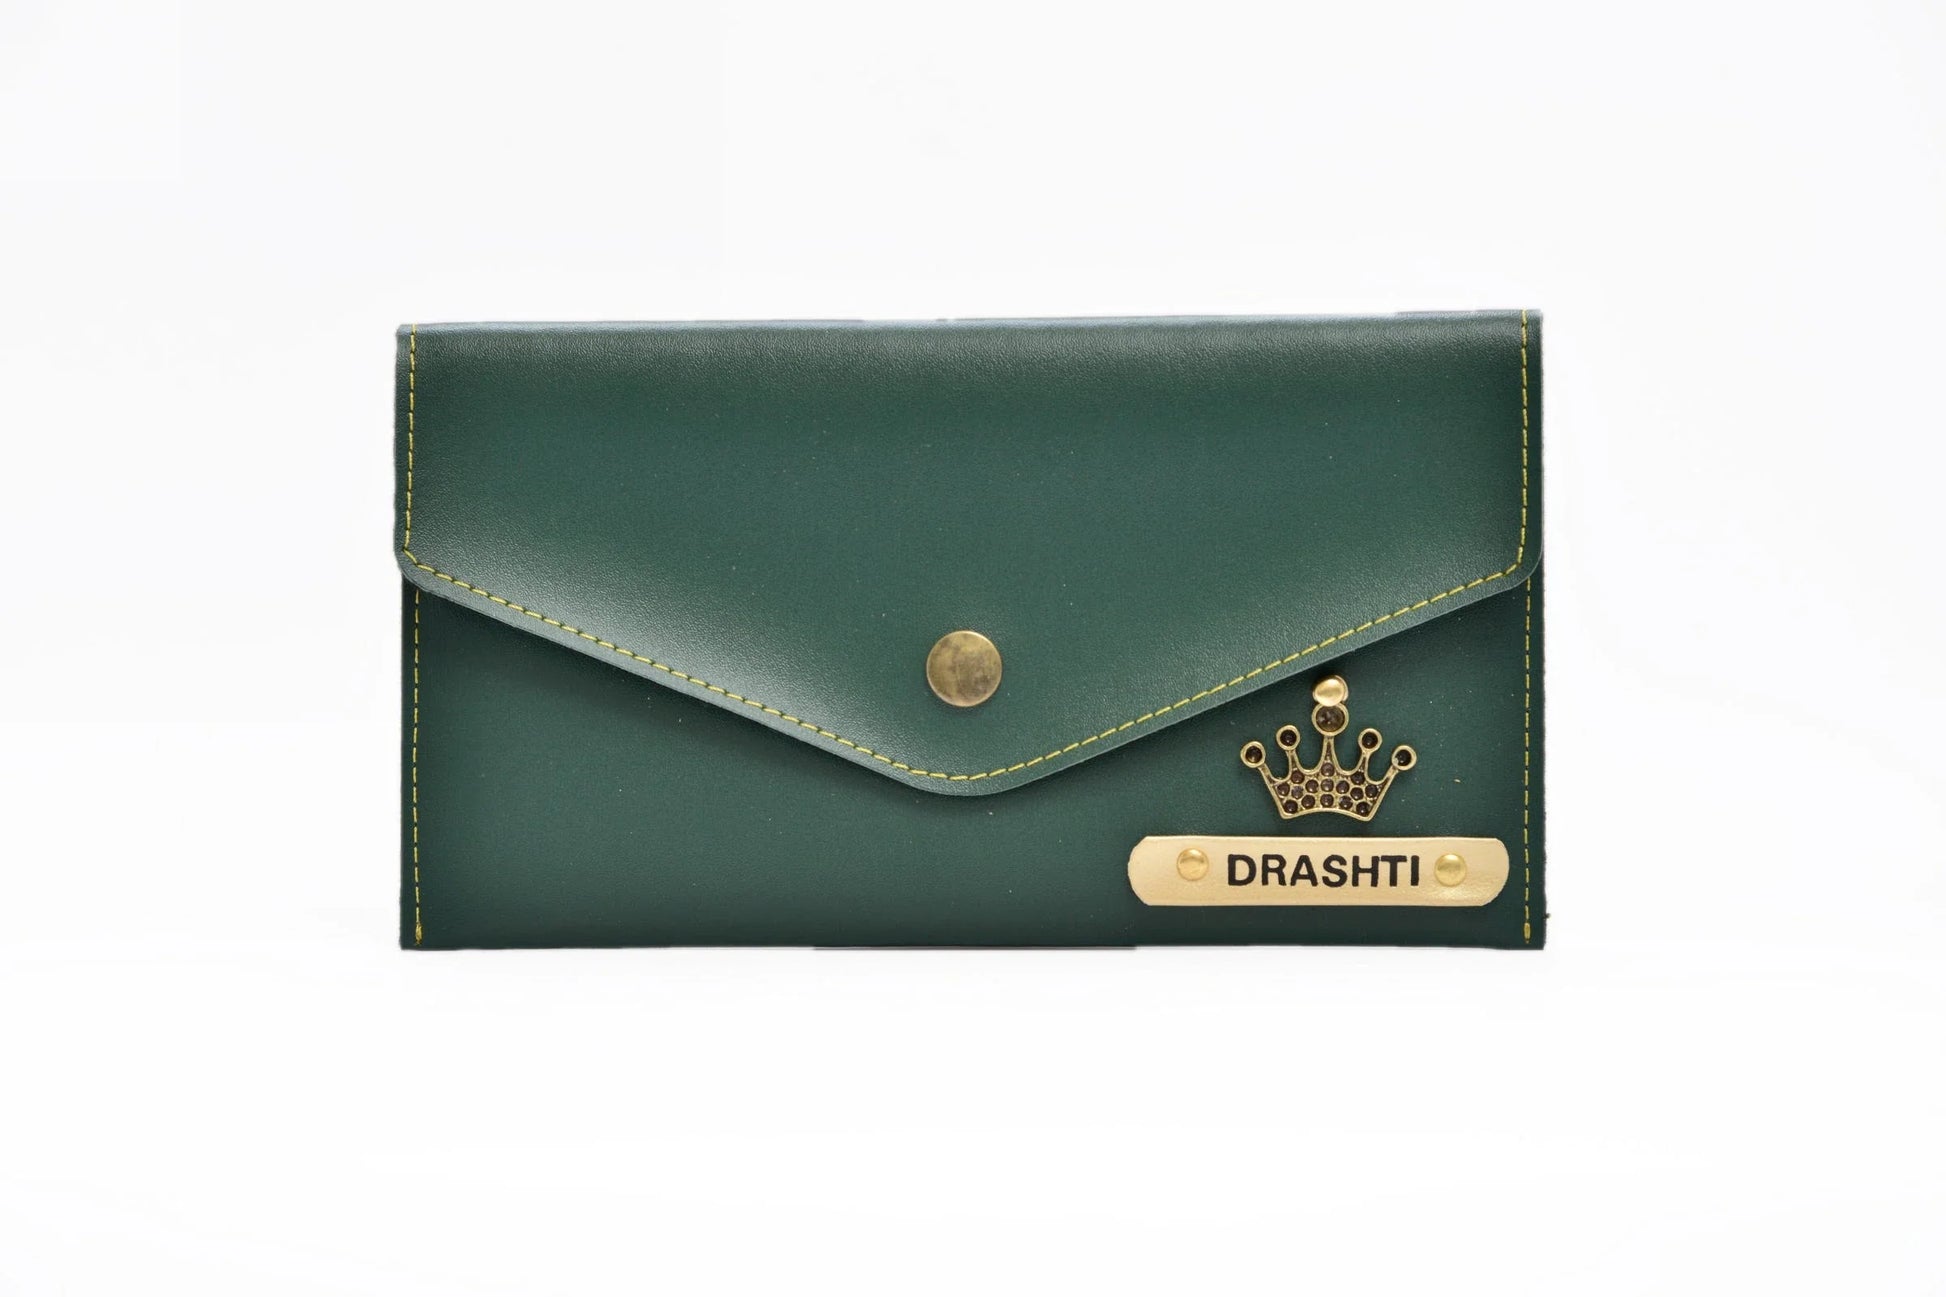 A timeless classic, this personalized leather clutch is the perfect accessory to complement any outfit. With ample space for your essentials and personalized options, it’s a must-have.